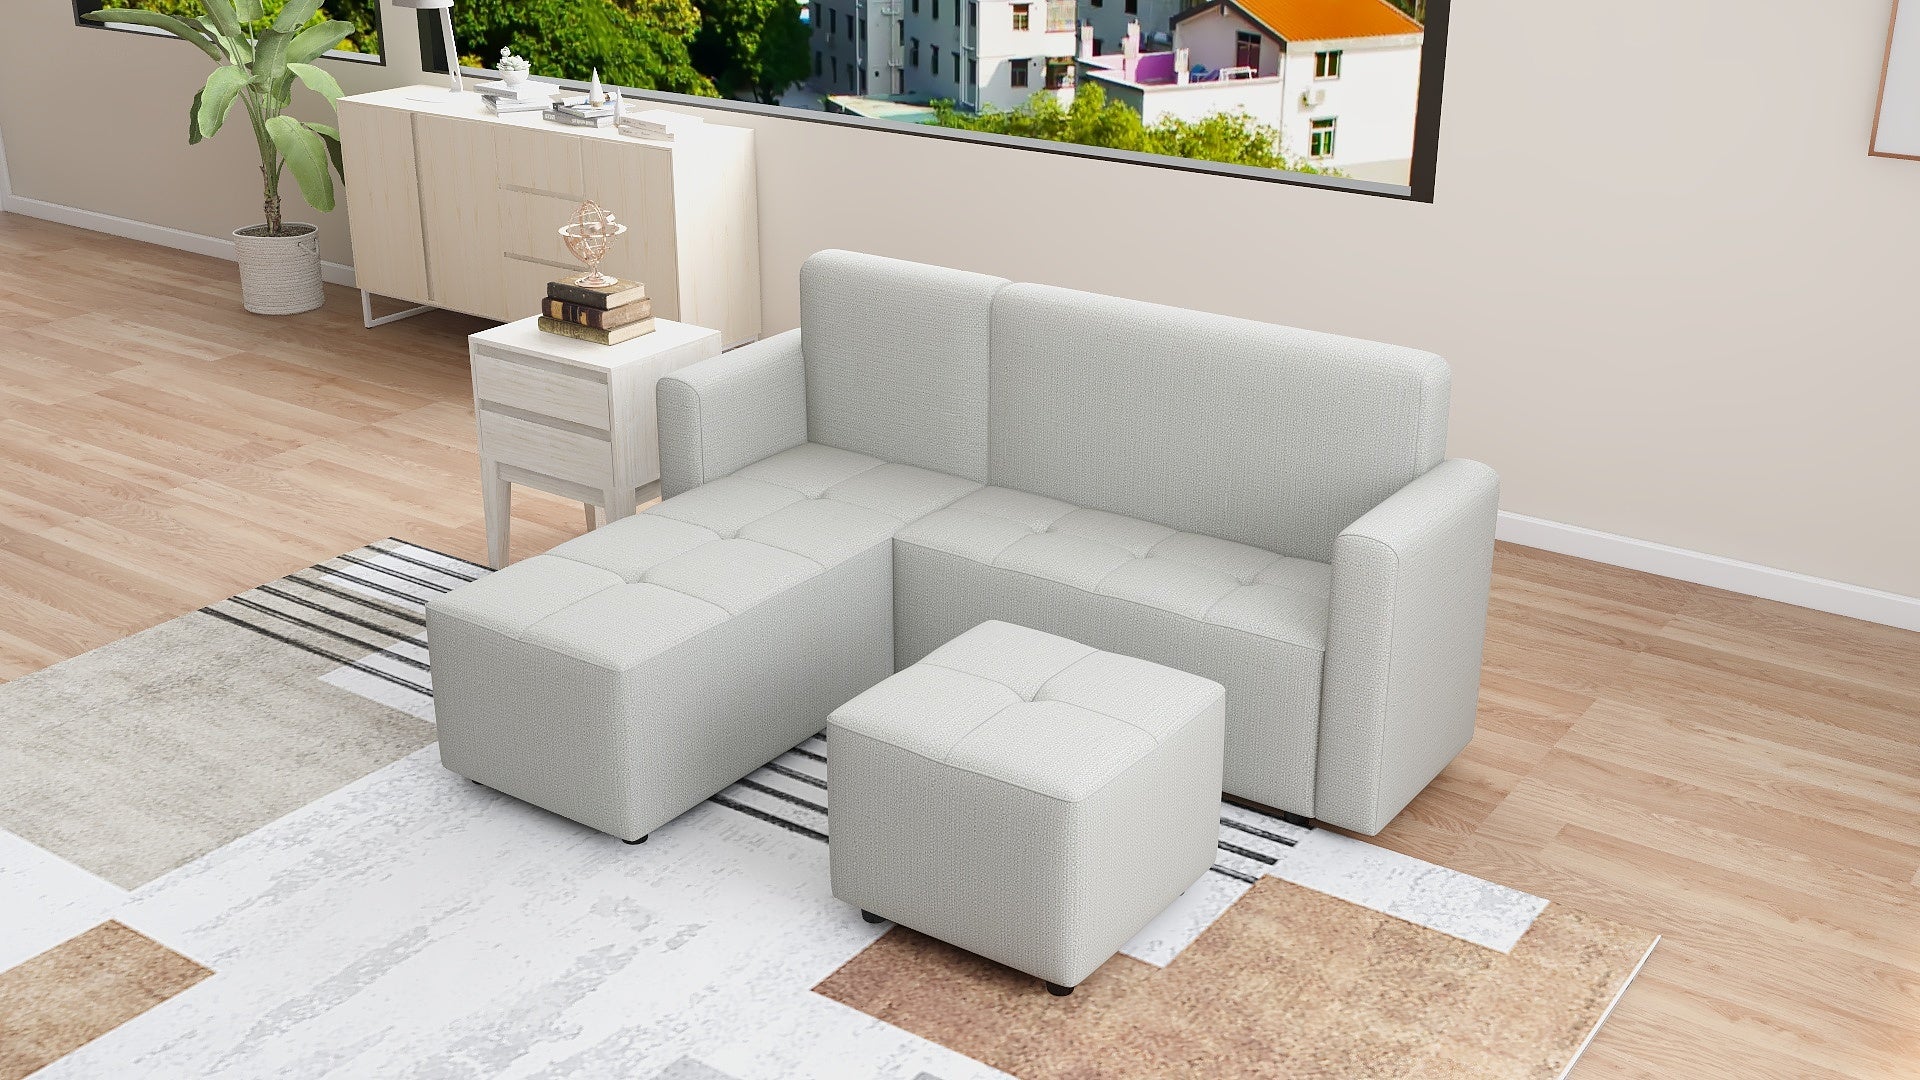 CONNER L-Shape Fabric Sofa with Ottoman AF Home